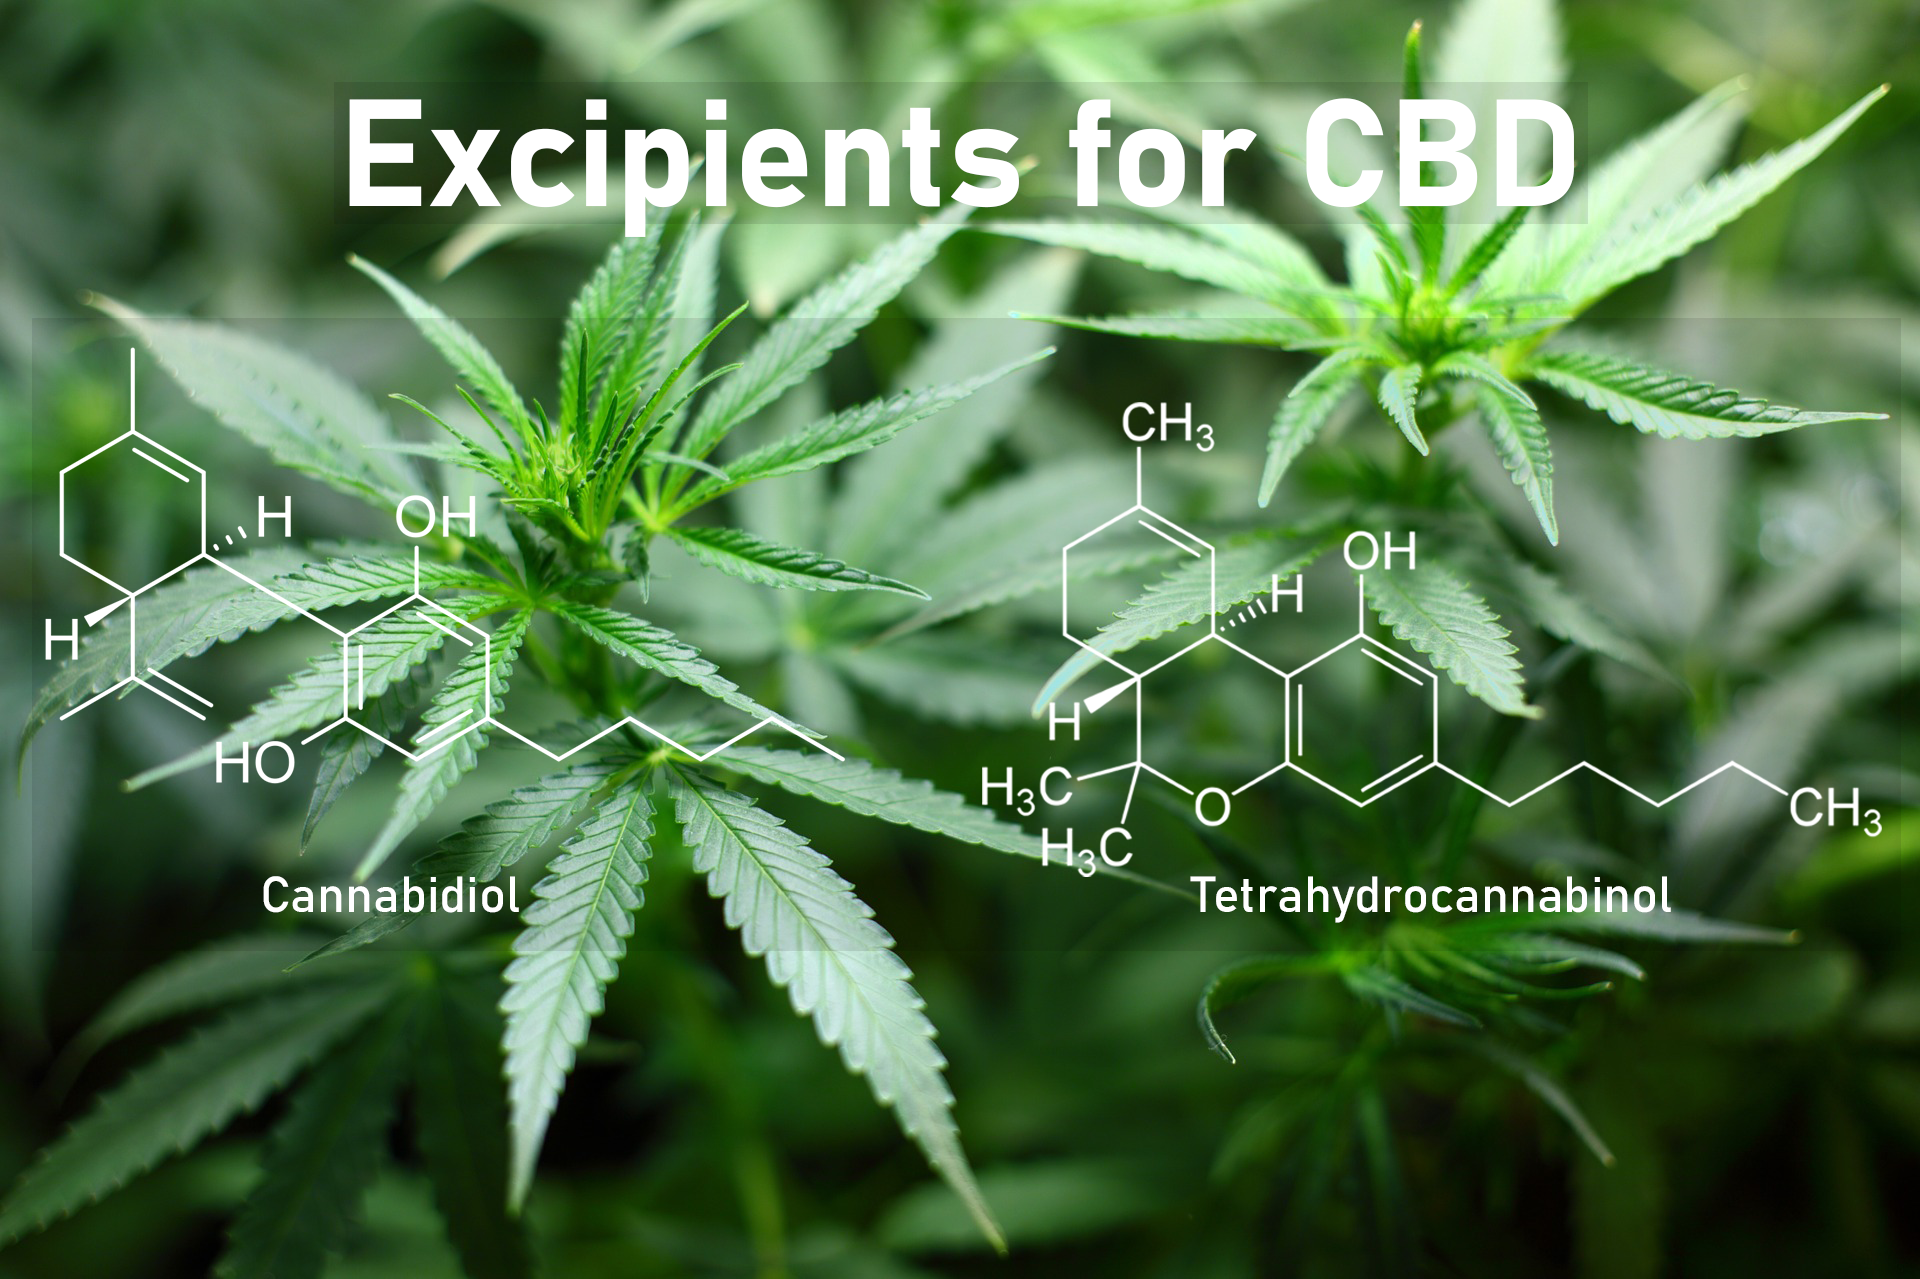 Role of Excipients in CBD Products